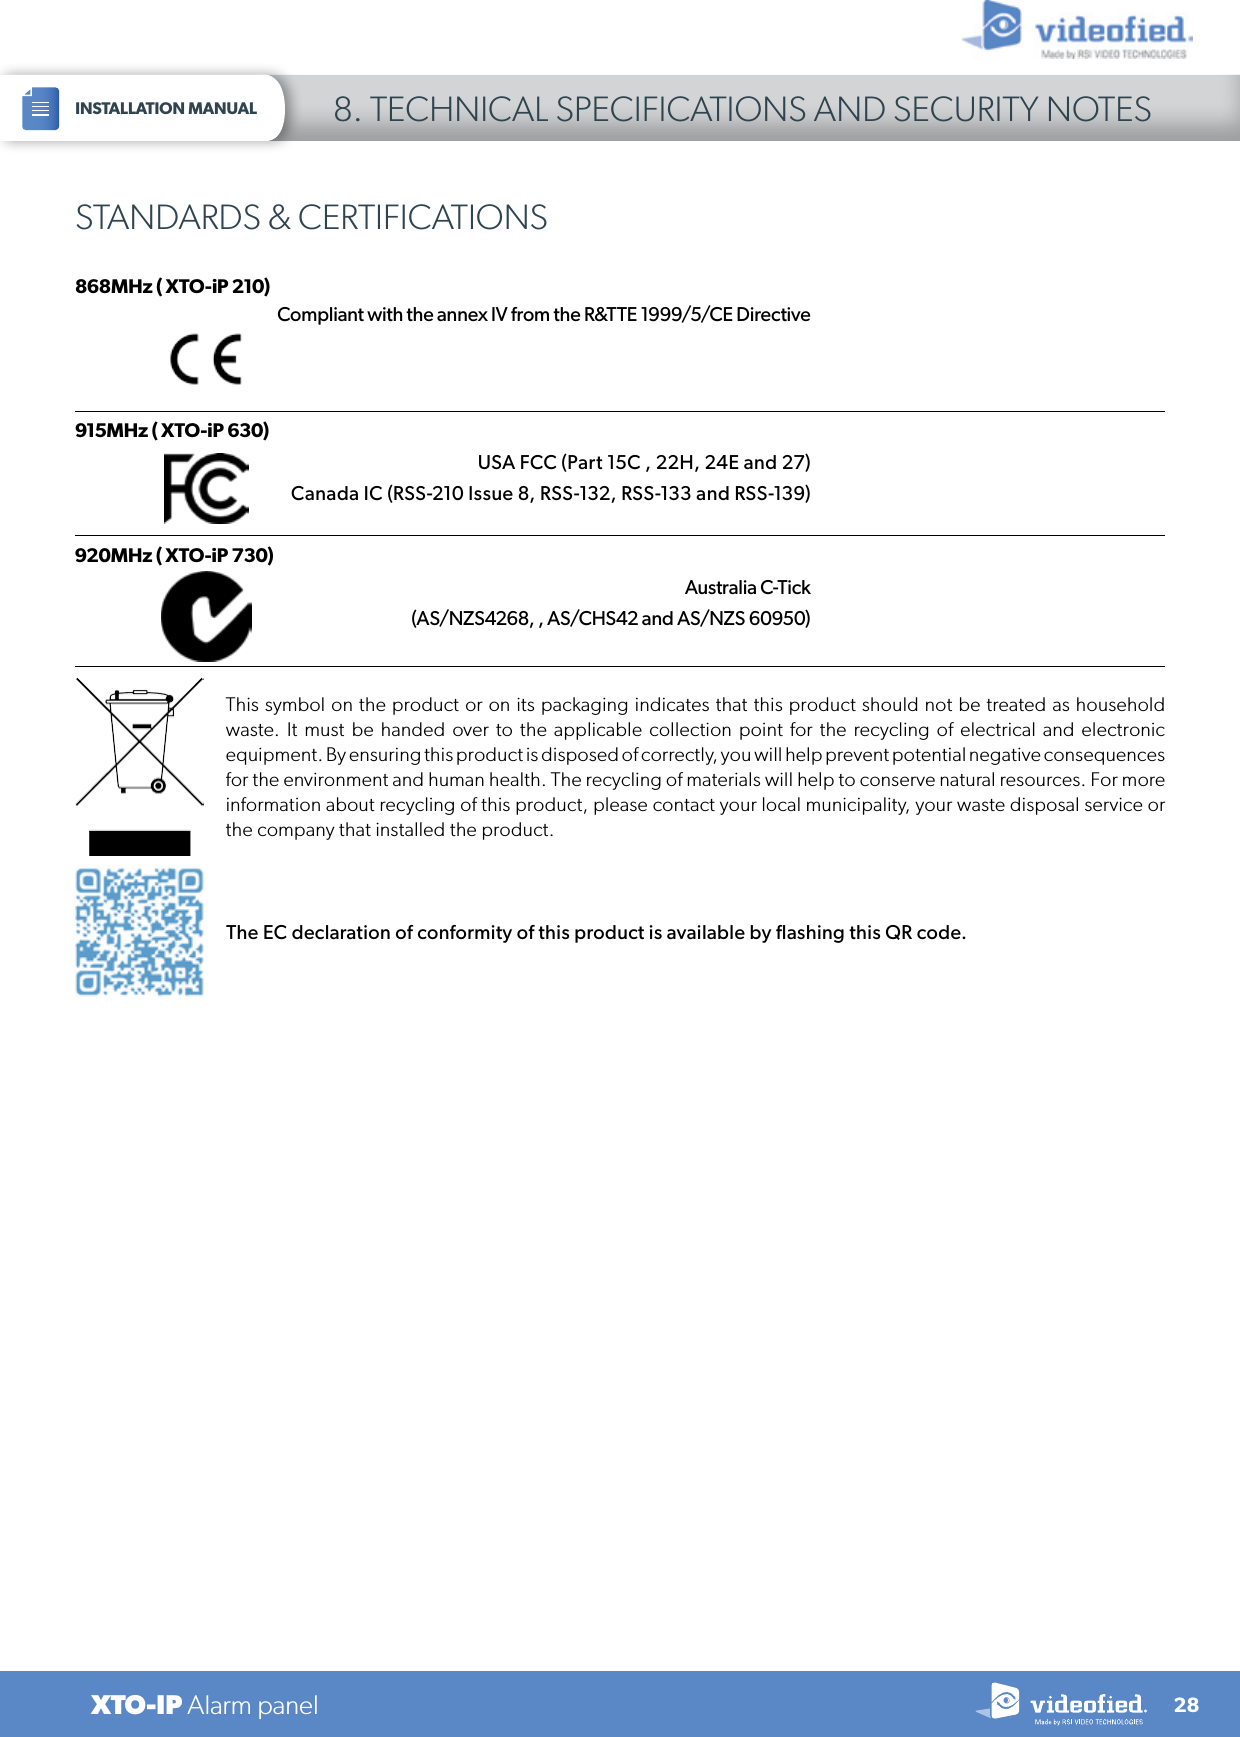 28XTO-IP Alarm panelINSTALLATION MANUAL 8. TECHNICAL SPECIFICATIONS AND SECURITY NOTESSTANDARDS &amp; CERTIFICATIONS868MHz ( XTO-iP 210)Compliant with the annex IV from the R&amp;TTE 1999/5/CE DirectiveThis symbol on the product or on its packaging indicates that this product should not be treated as household waste. It must be handed over to the applicable collection point for the recycling of electrical and electronic equipment. By ensuring this product is disposed of correctly, you will help prevent potential negative consequences for the environment and human health. The recycling of materials will help to conserve natural resources. For more information about recycling of this product, please contact your local municipality, your waste disposal service or the company that installed the product.915MHz ( XTO-iP 630) USA FCC (Part 15C , 22H, 24E and 27)  Canada IC (RSS-210 Issue 8, RSS-132, RSS-133 and RSS-139) 920MHz ( XTO-iP 730)Australia C-Tick(AS/NZS4268, , AS/CHS42 and AS/NZS 60950)The EC declaration of conformity of this product is available by flashing this QR code.